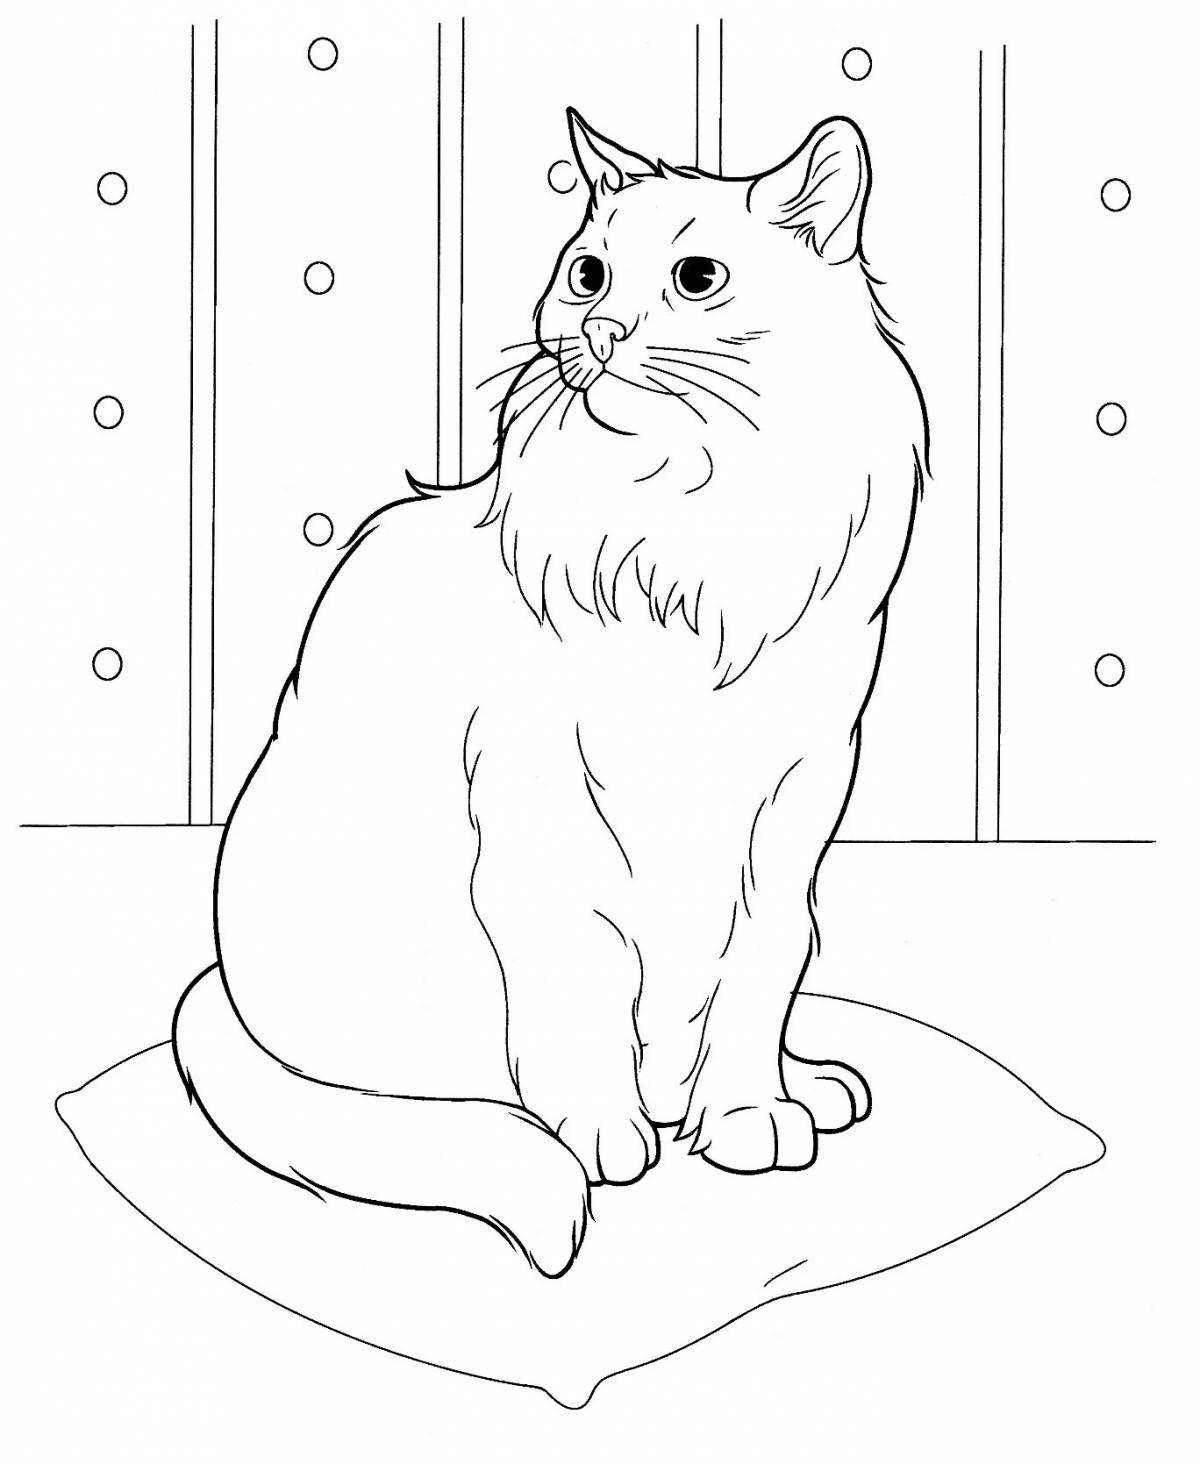 Coloring book fluffy cotton cat